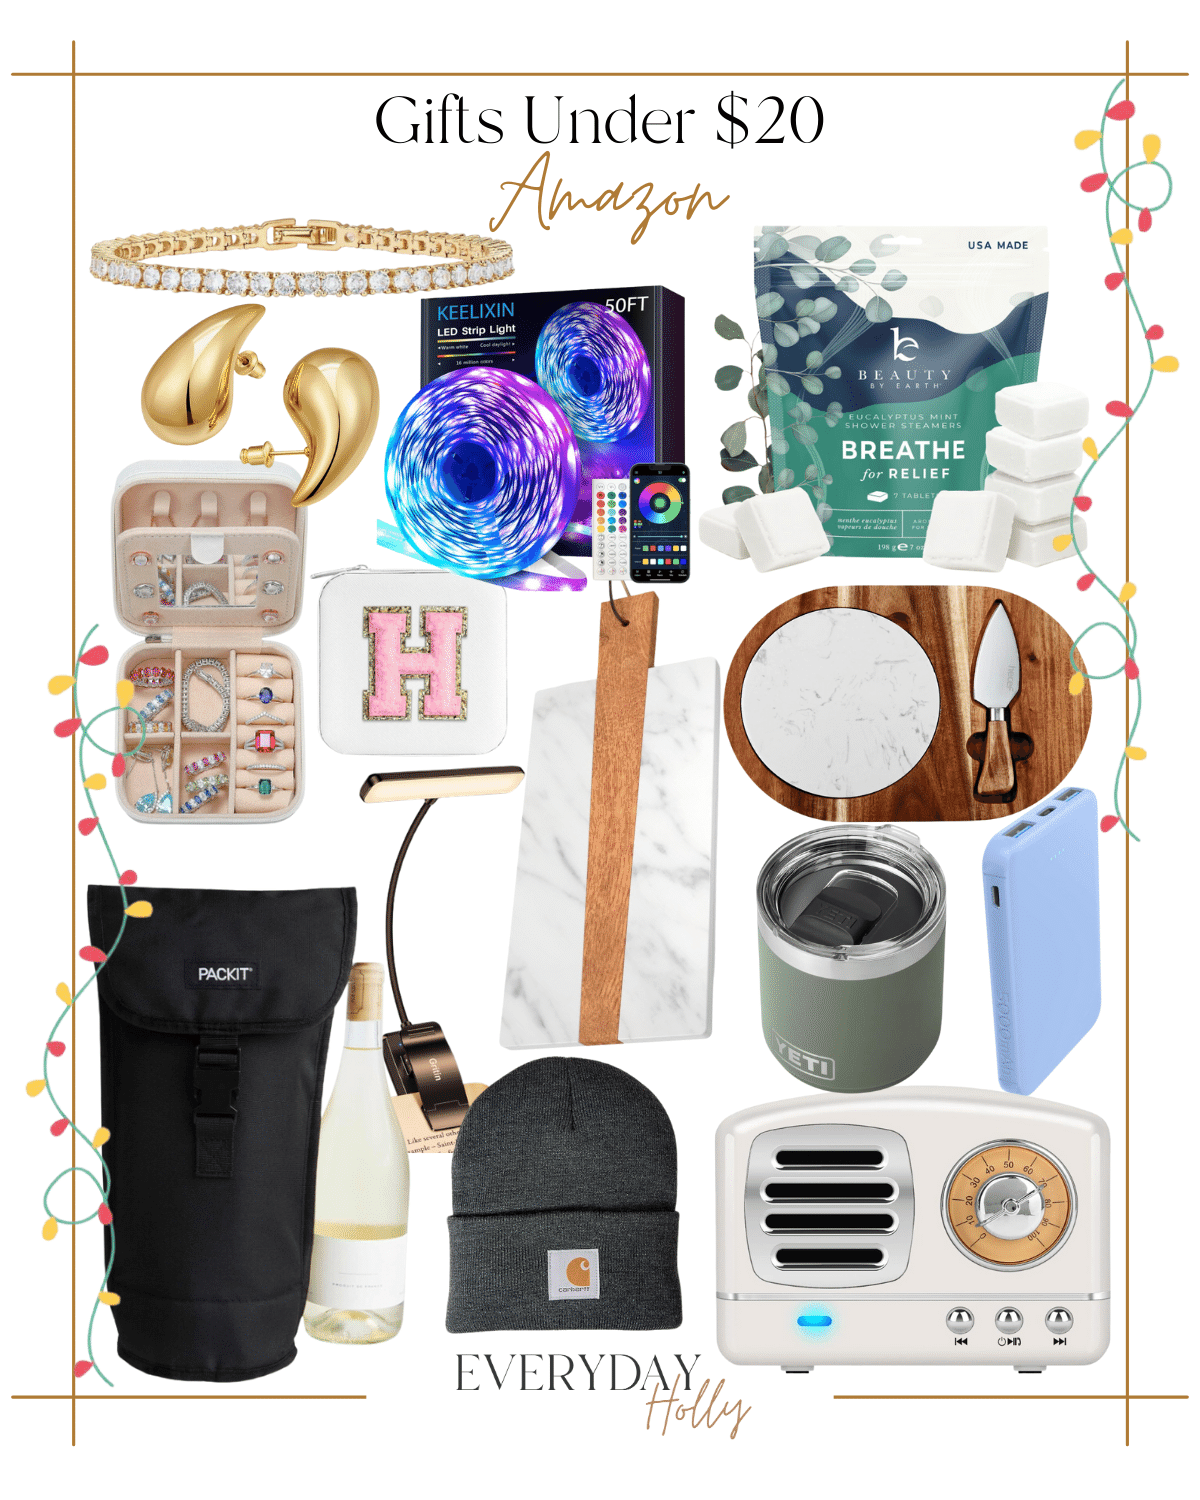 99 last minute gifts under $99 | #last #minute #gifts #giftideas #giftsunder99 #under99 #under20 #jewelry #earring #shower #steamers #LEDlight #charger #cheeseboard #wine #initial #jewelrycase #yeti #mug #speaker #beanie #winter